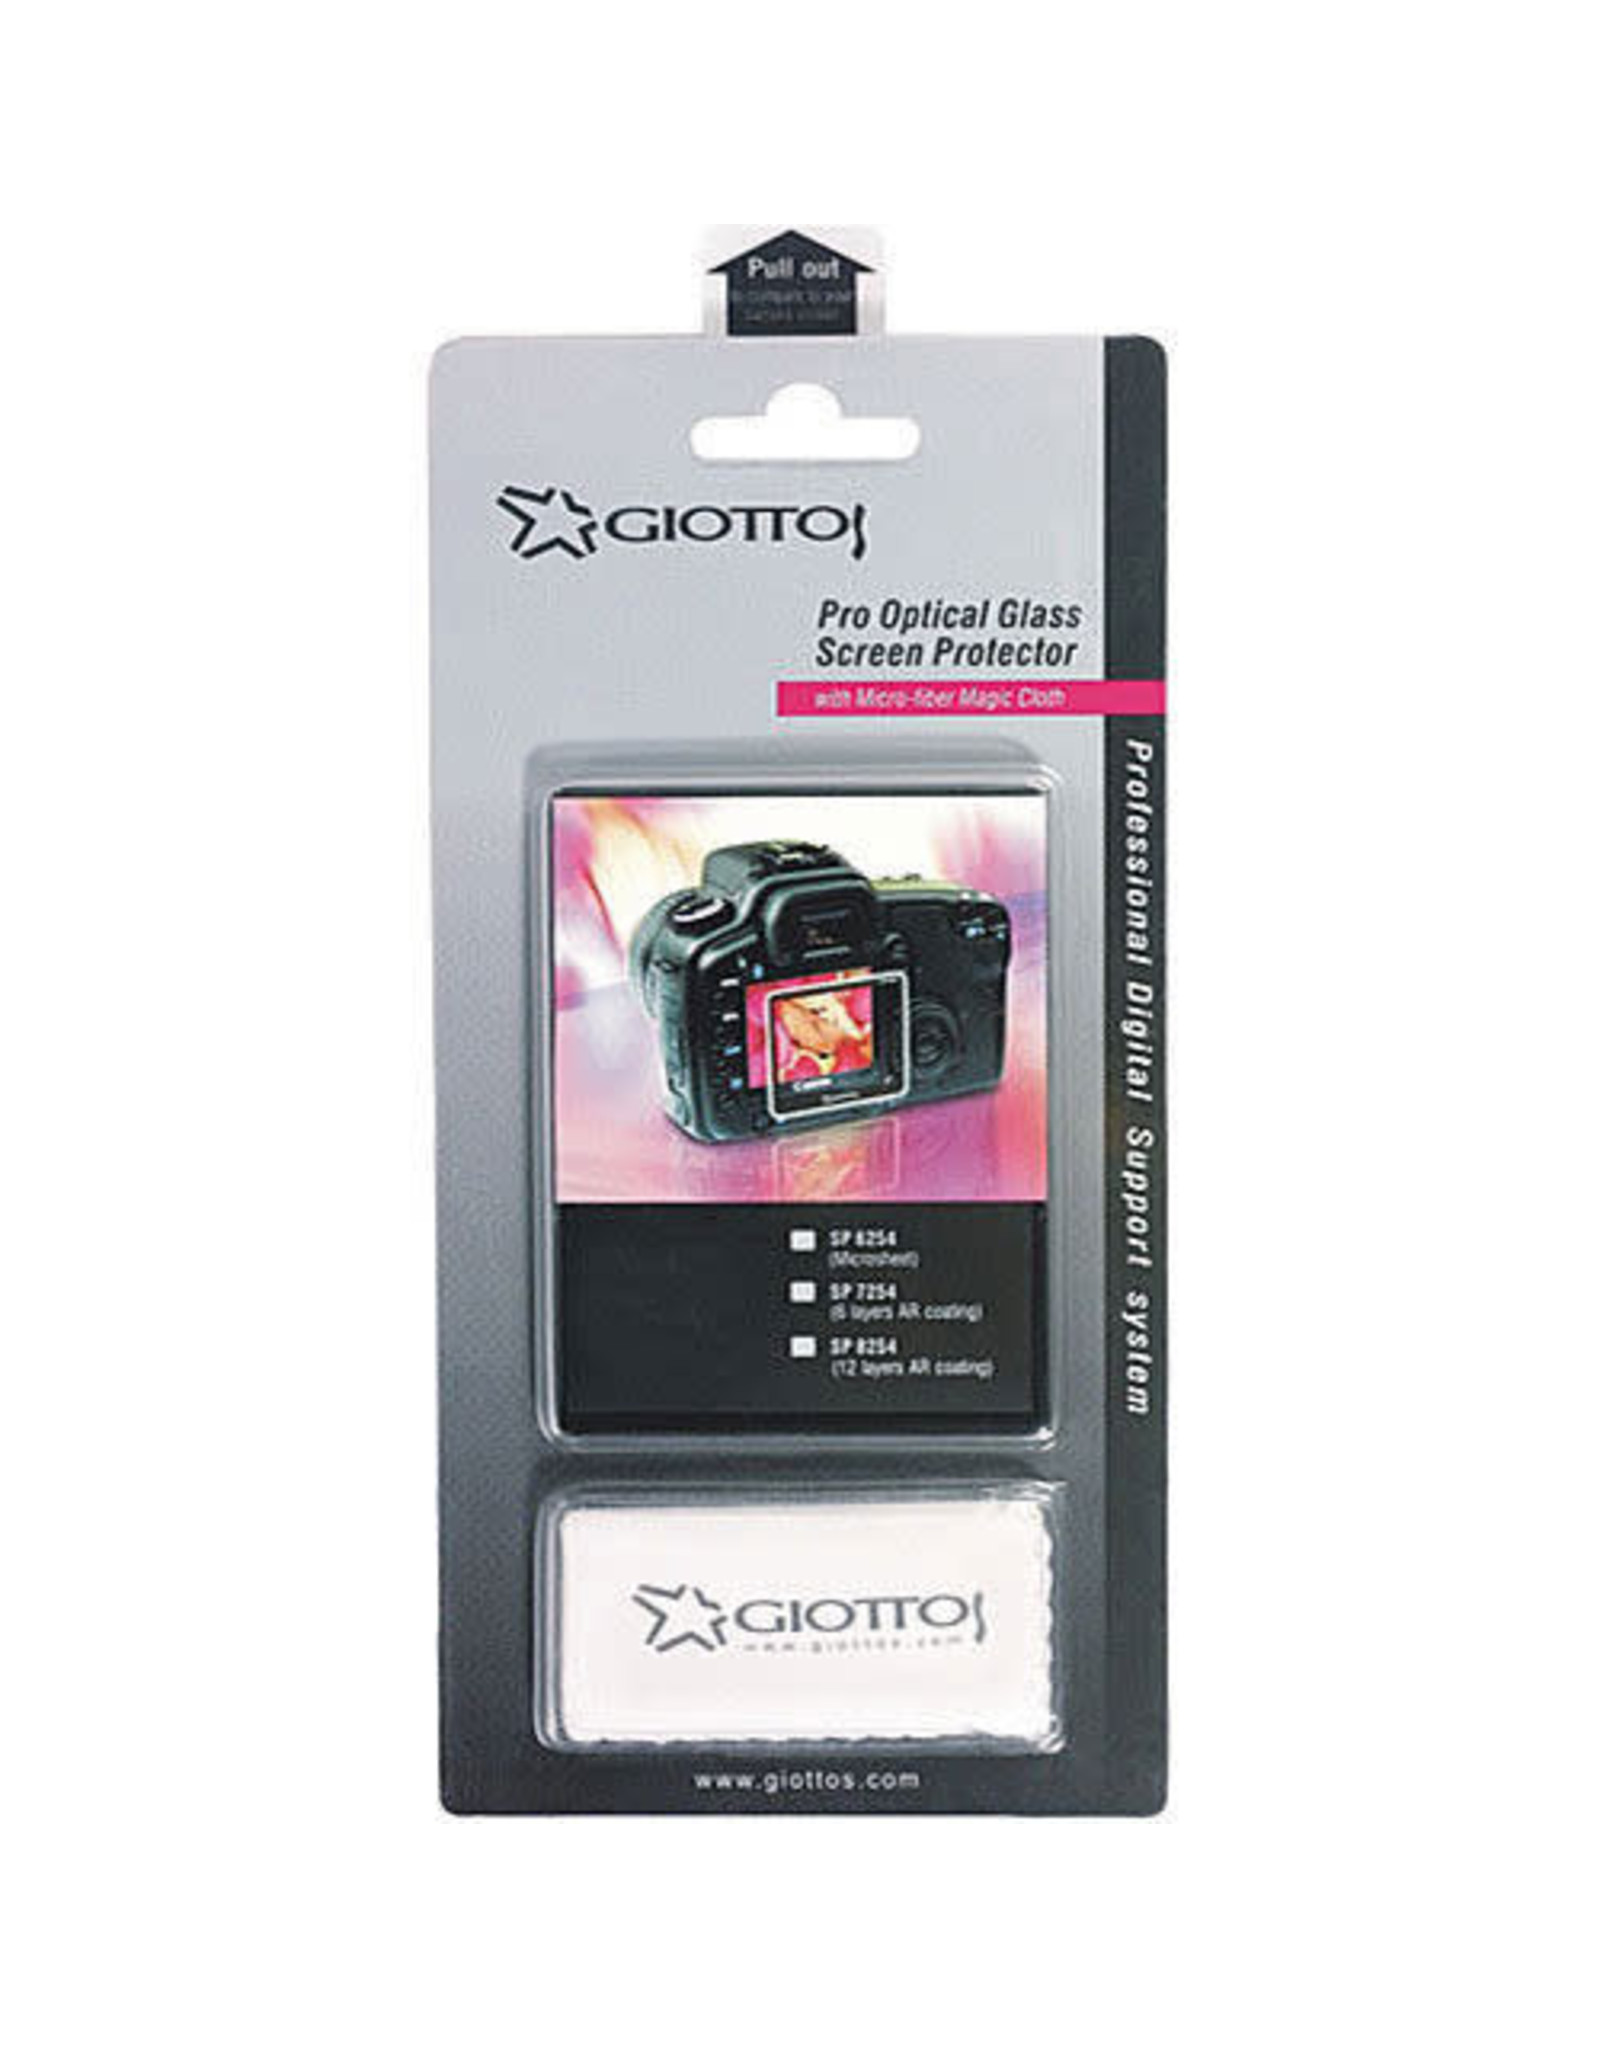 Giottos Aegis Pro M-C Schott Glass LCD Screen Protector for Nikon D60